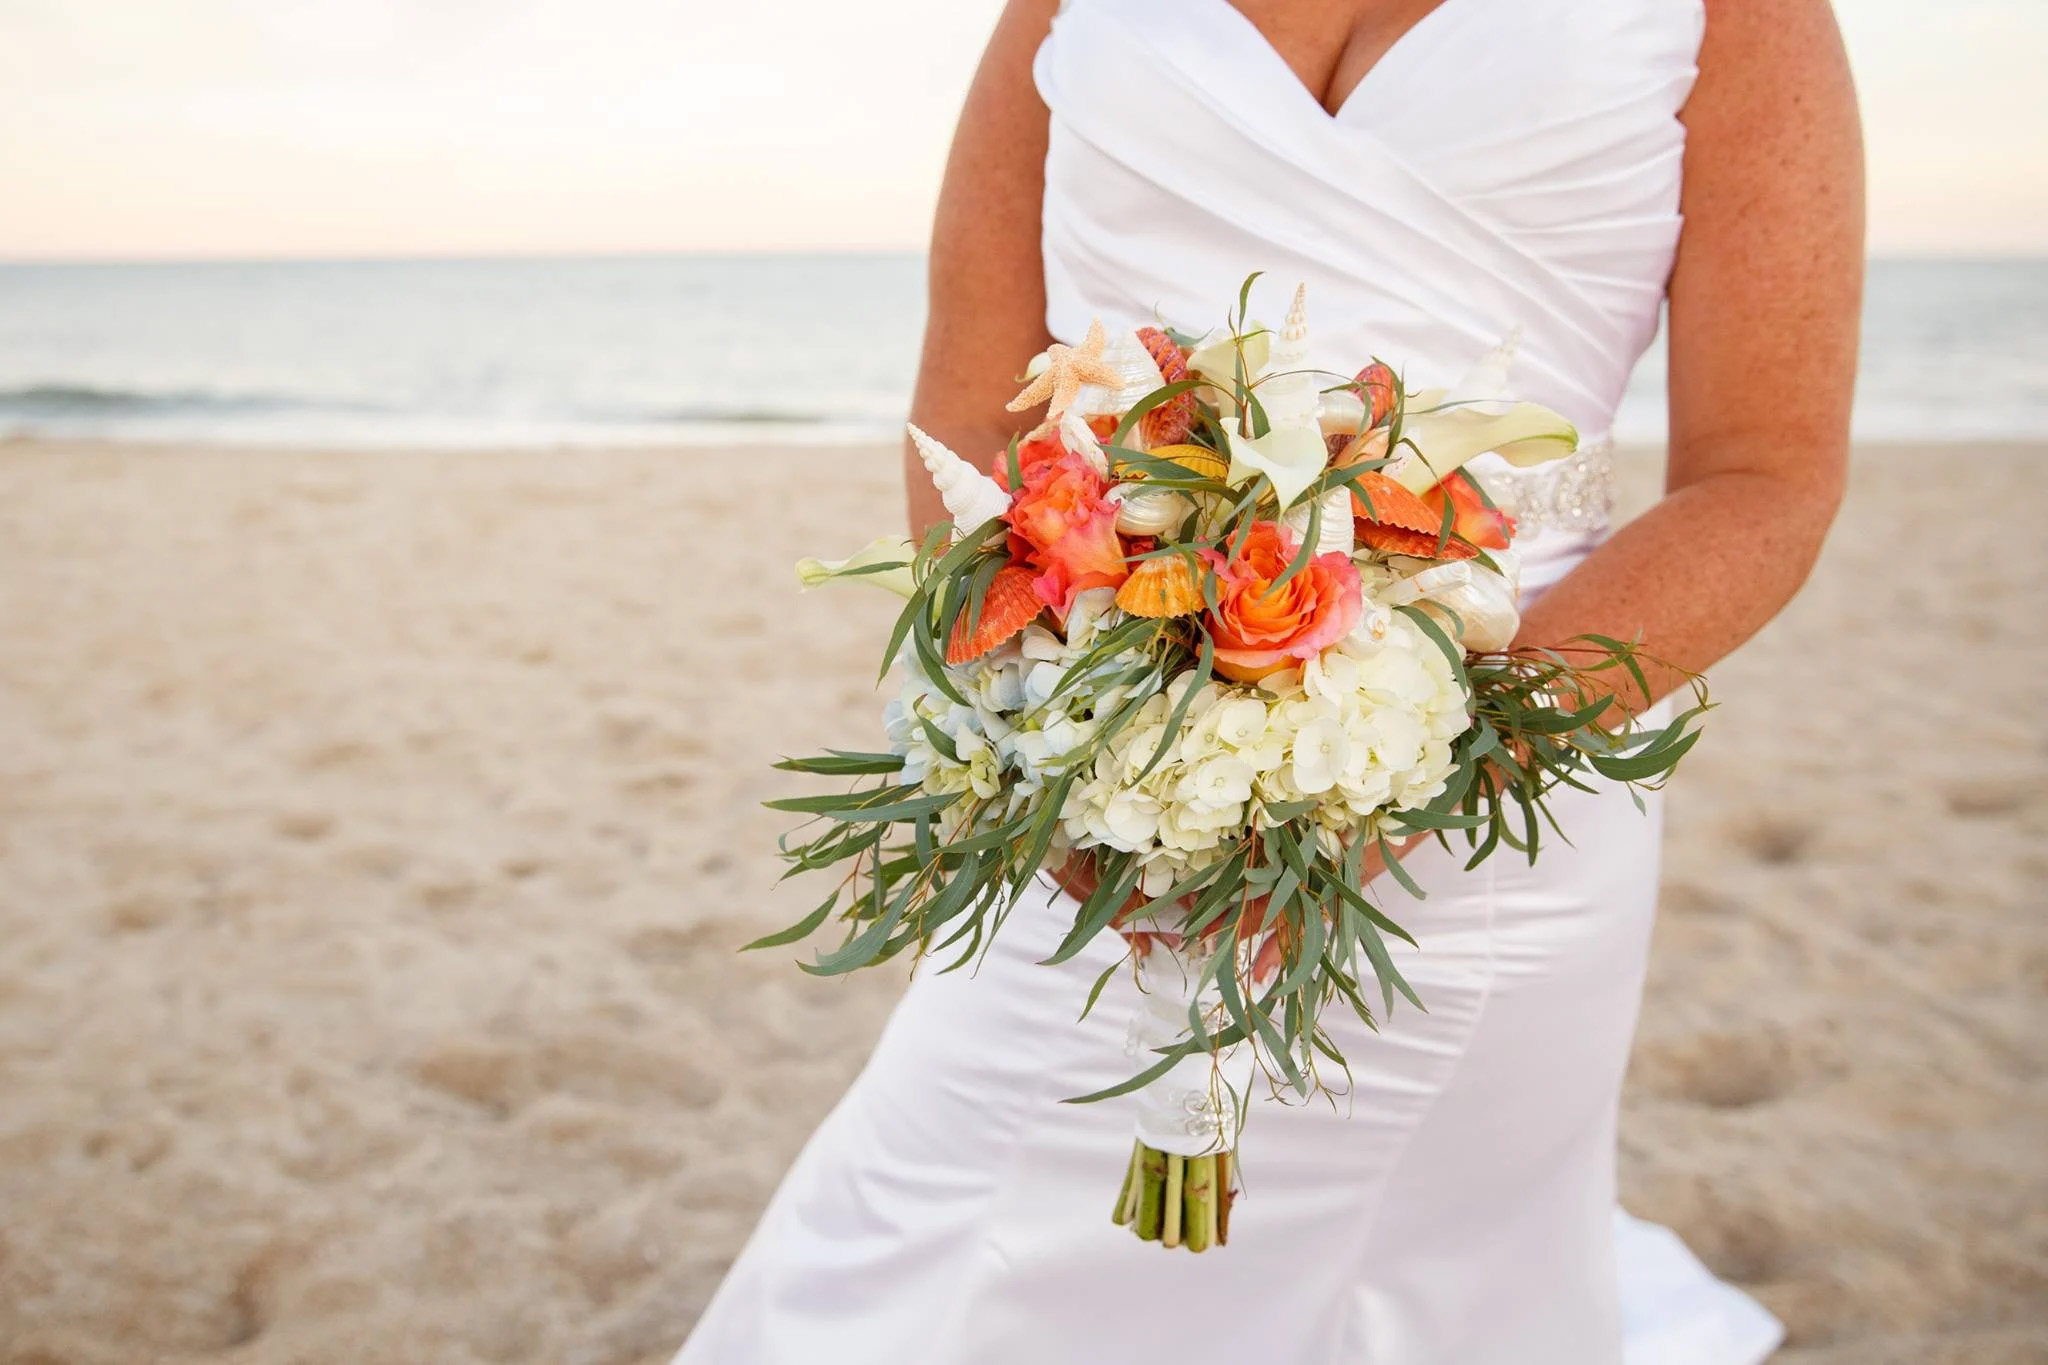 Bride holding bouquet on beach at sunset